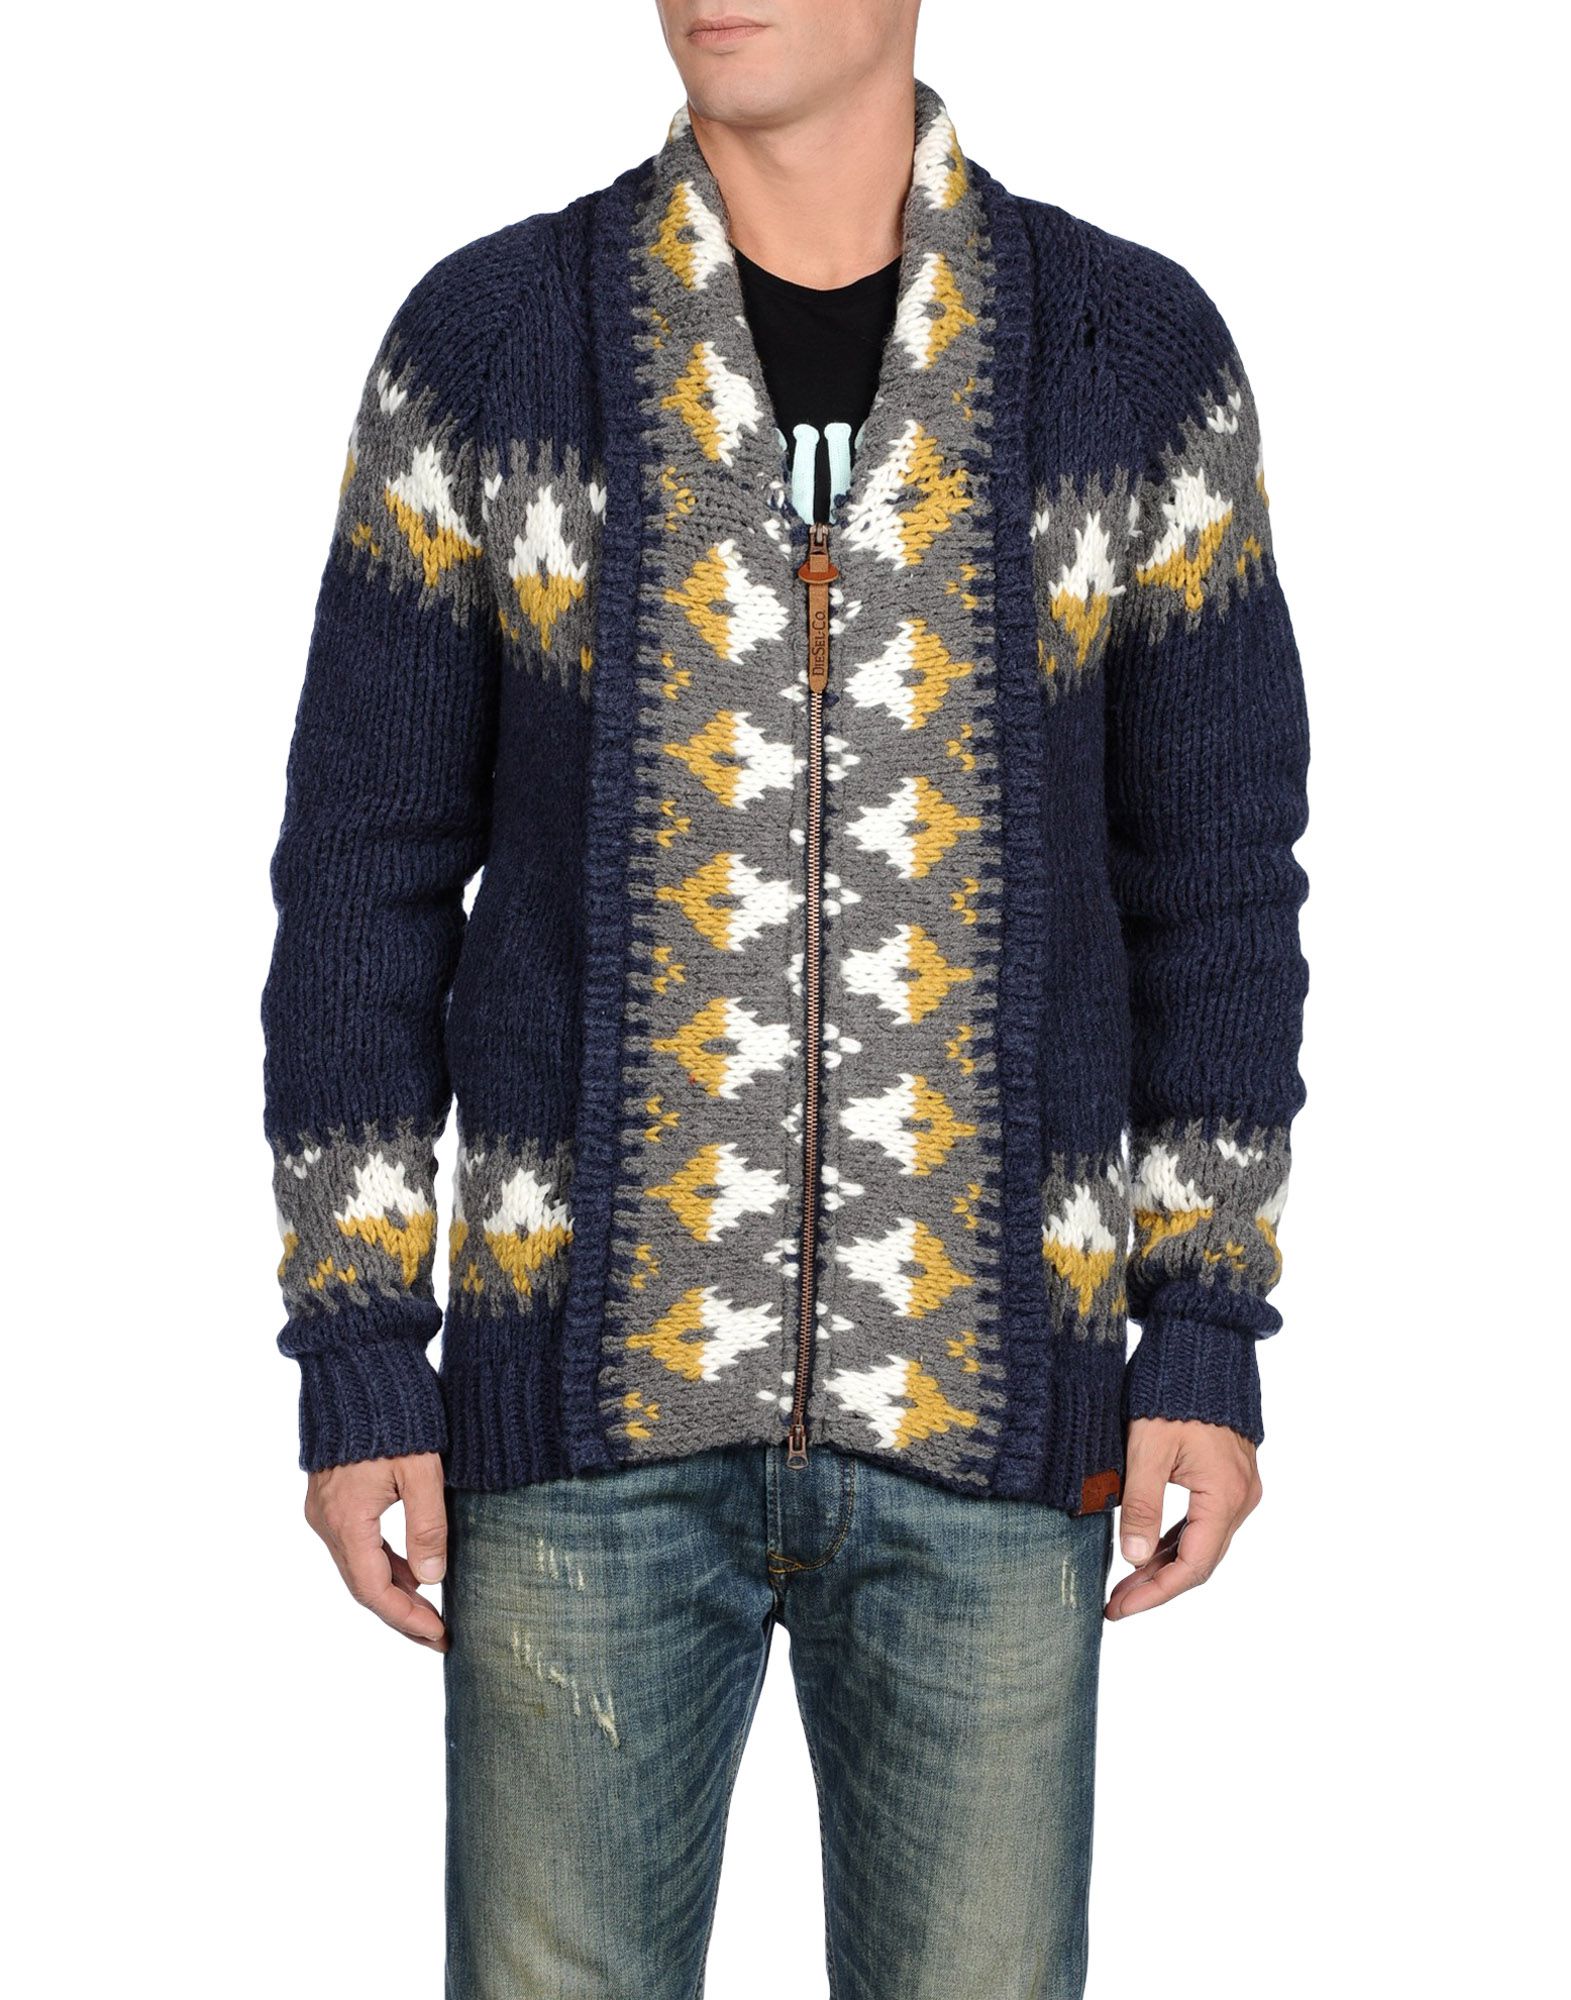 DIESEL Chunky Cardigan with Farisle Print in Blue for Men - Lyst